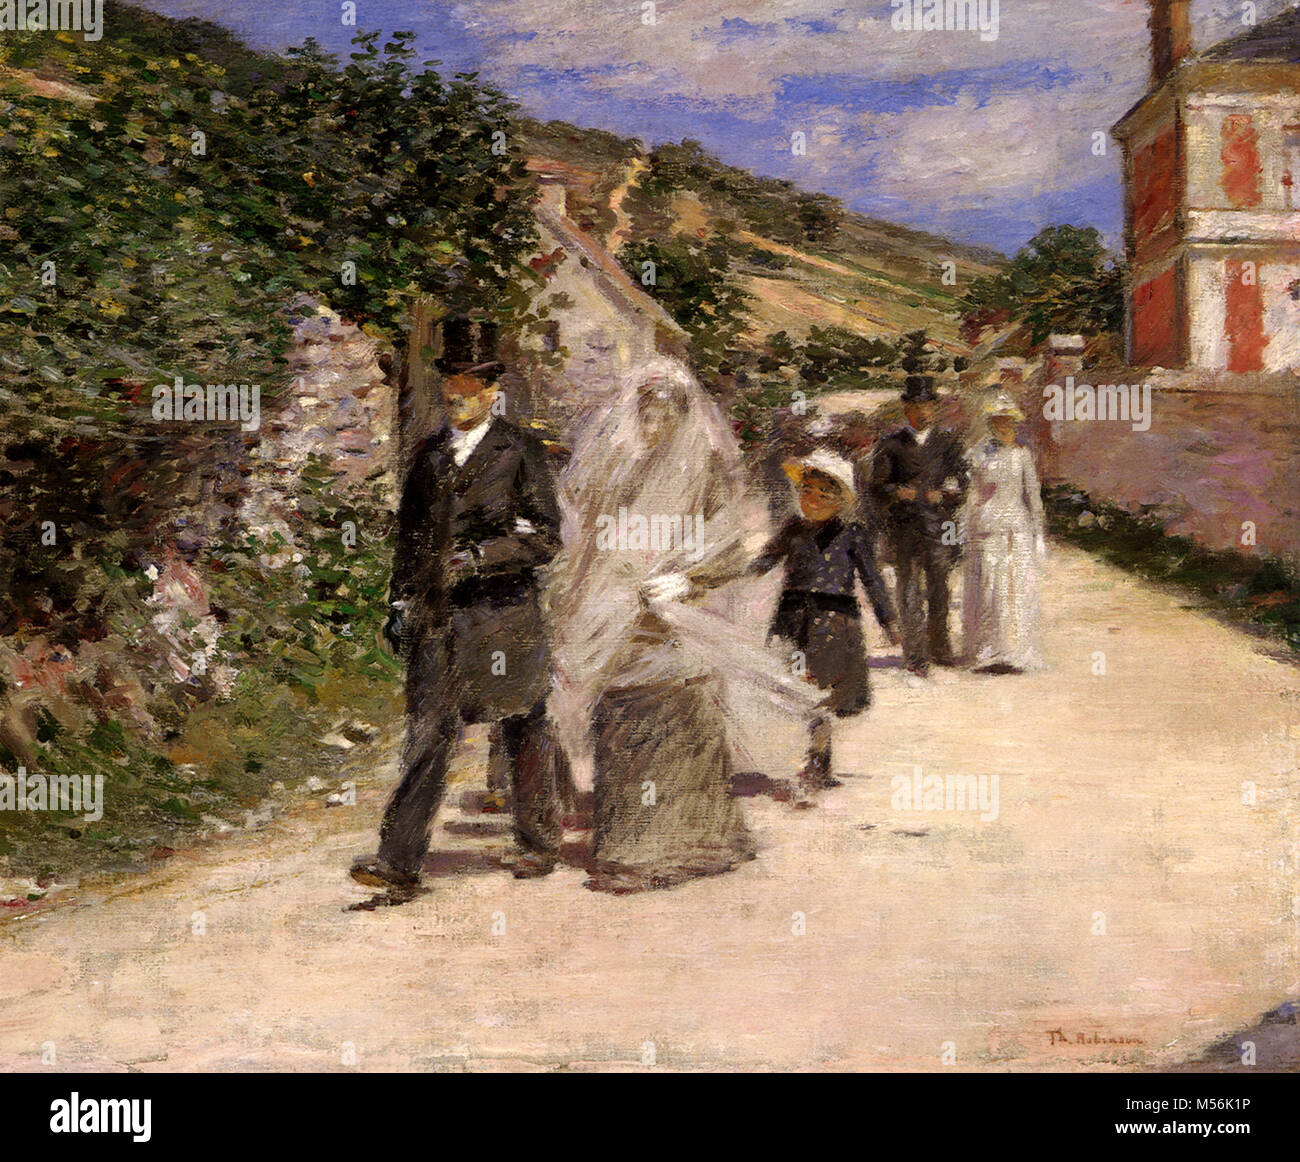 WEDDING PROCESSION BRIDE GROOM & CUPID CLASSIC PAINTING ART REAL CANVAS PRINT 